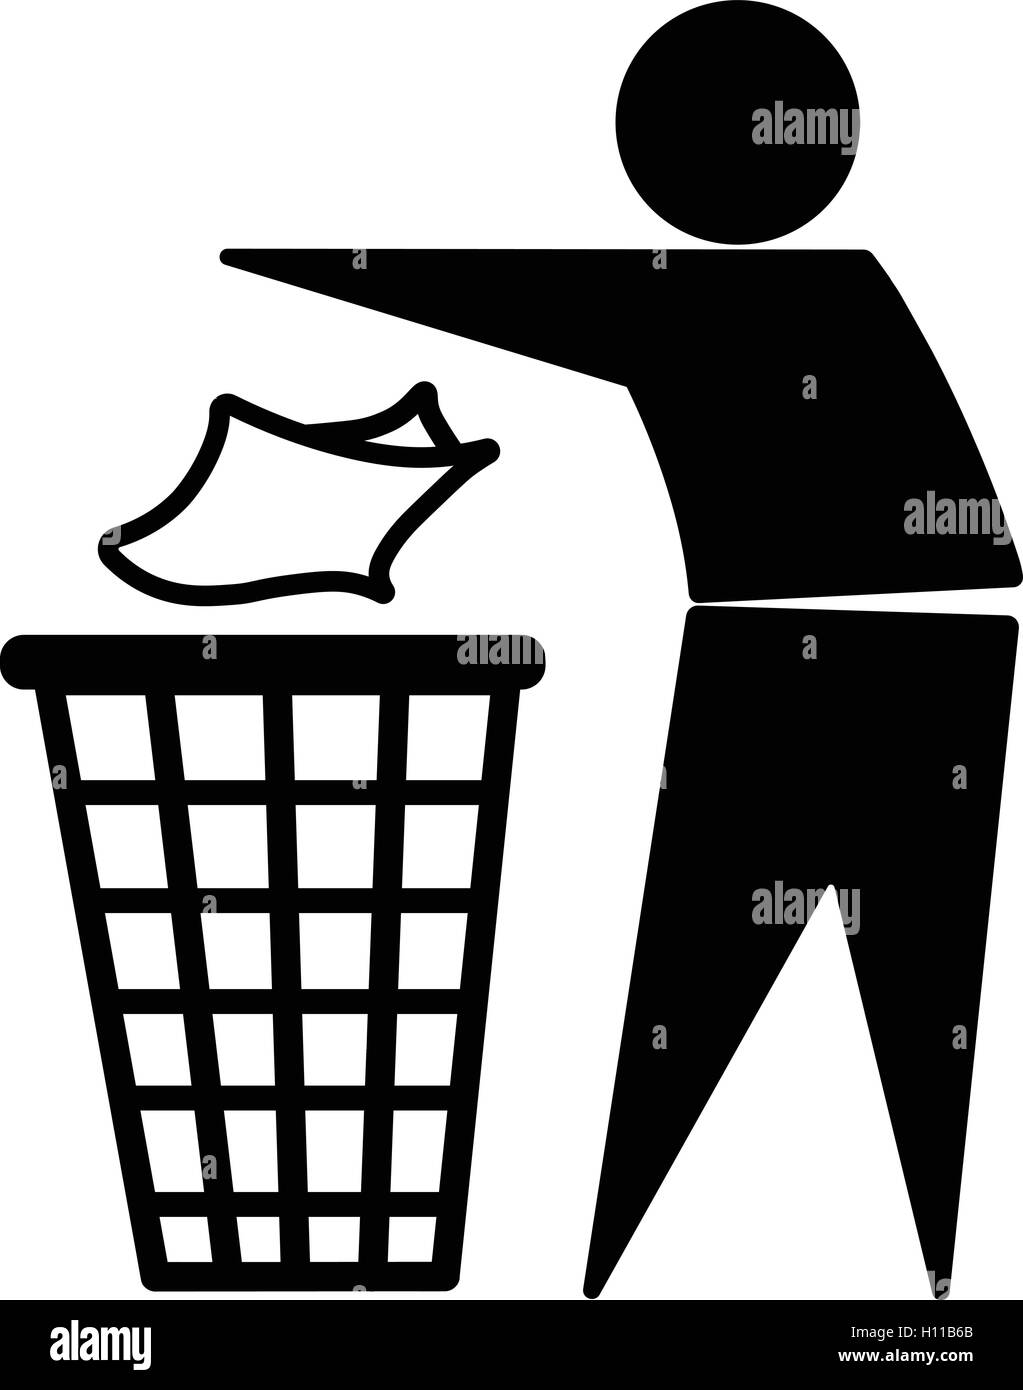 Tidy man symbol, do not litter icon, keep clean, dispose of carefully and thoughtfully symbol. Vector illustration. Stock Vector